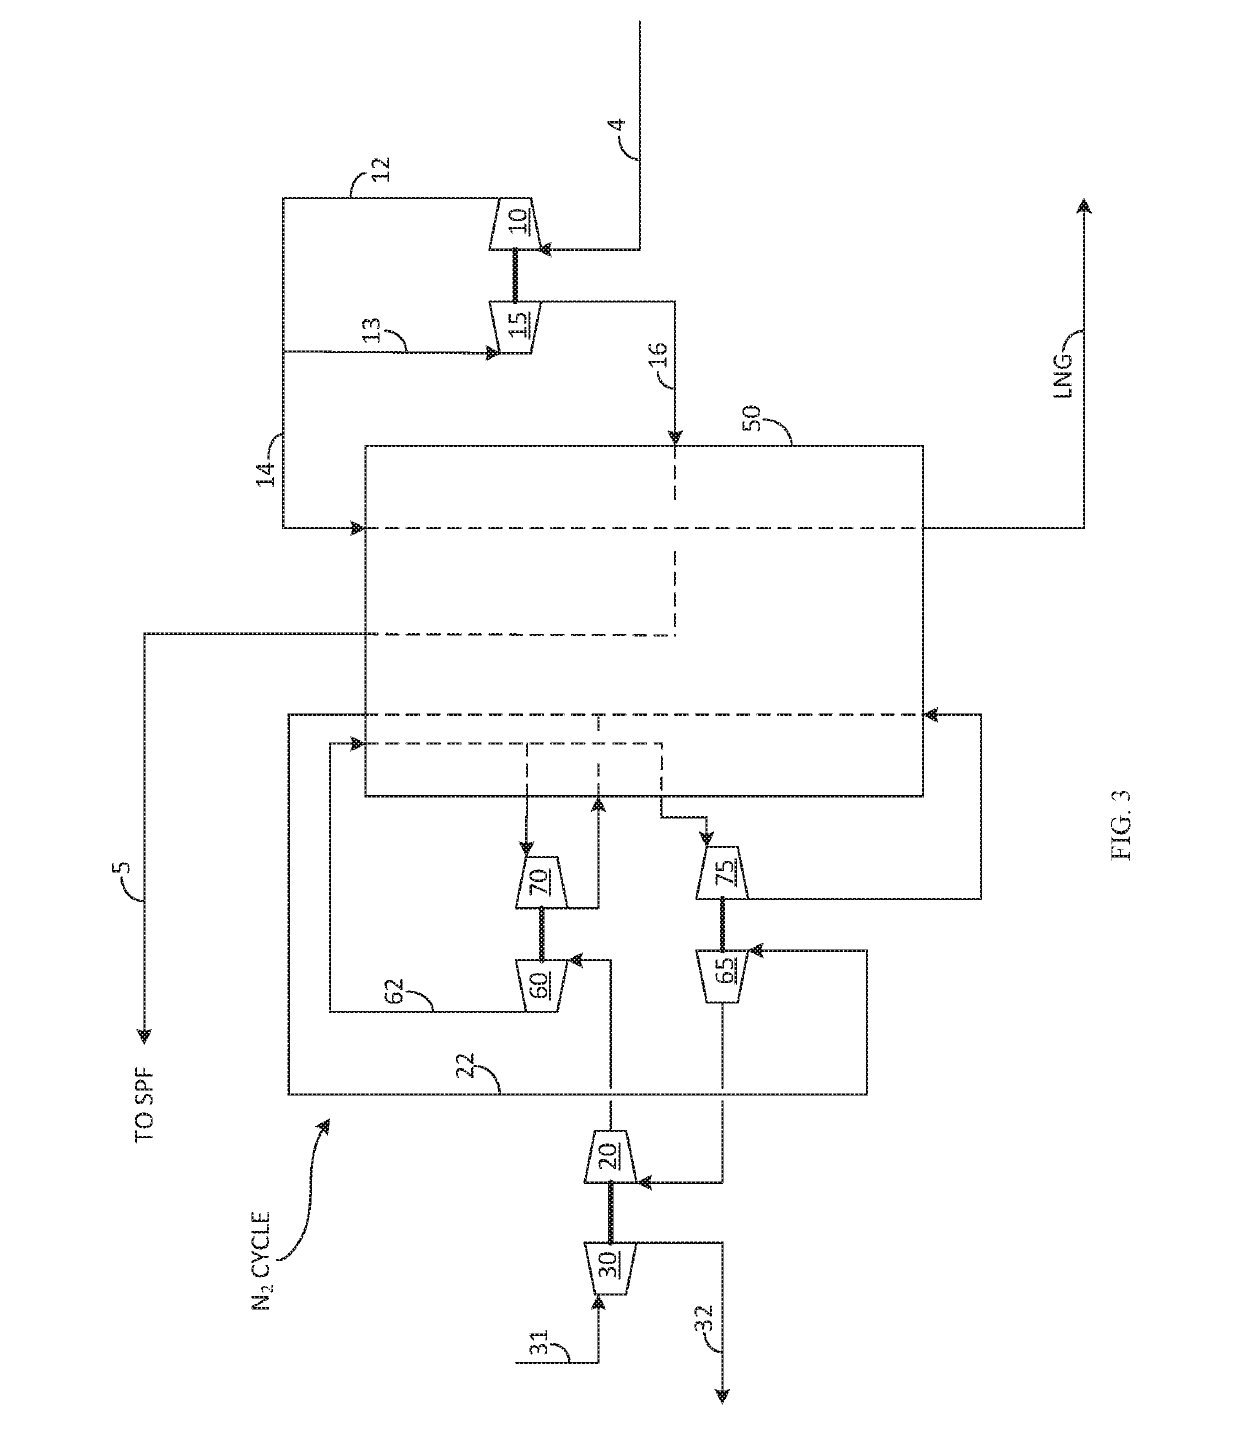 Method for the integration of liquefied natural gas and syngas production